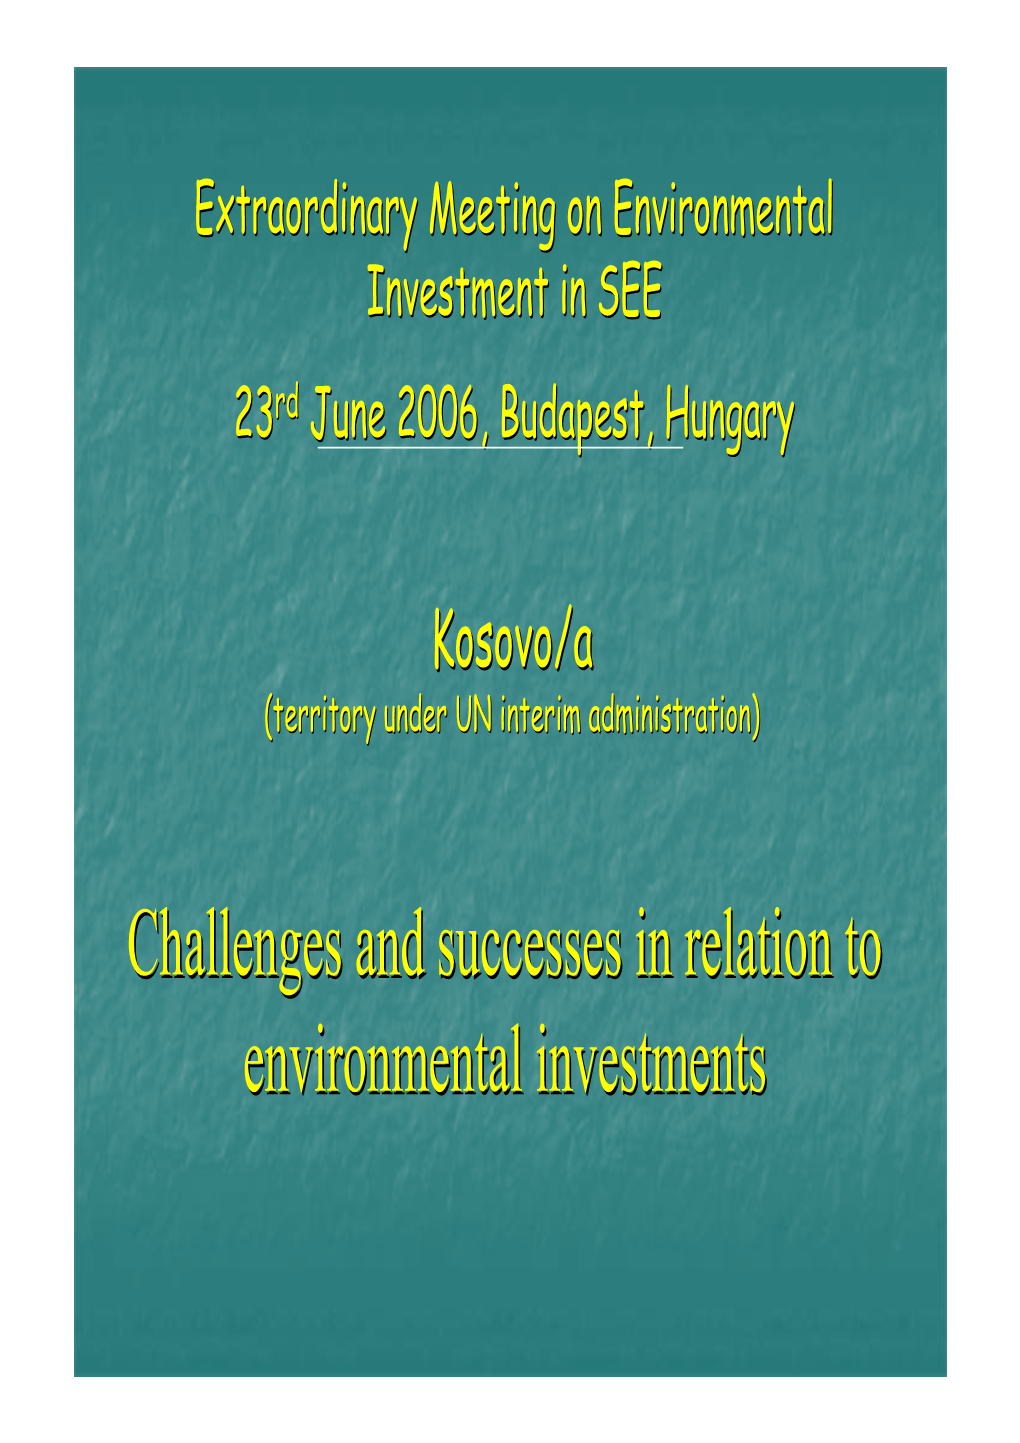 Challenges and Successes in Relation to Environmental Investments